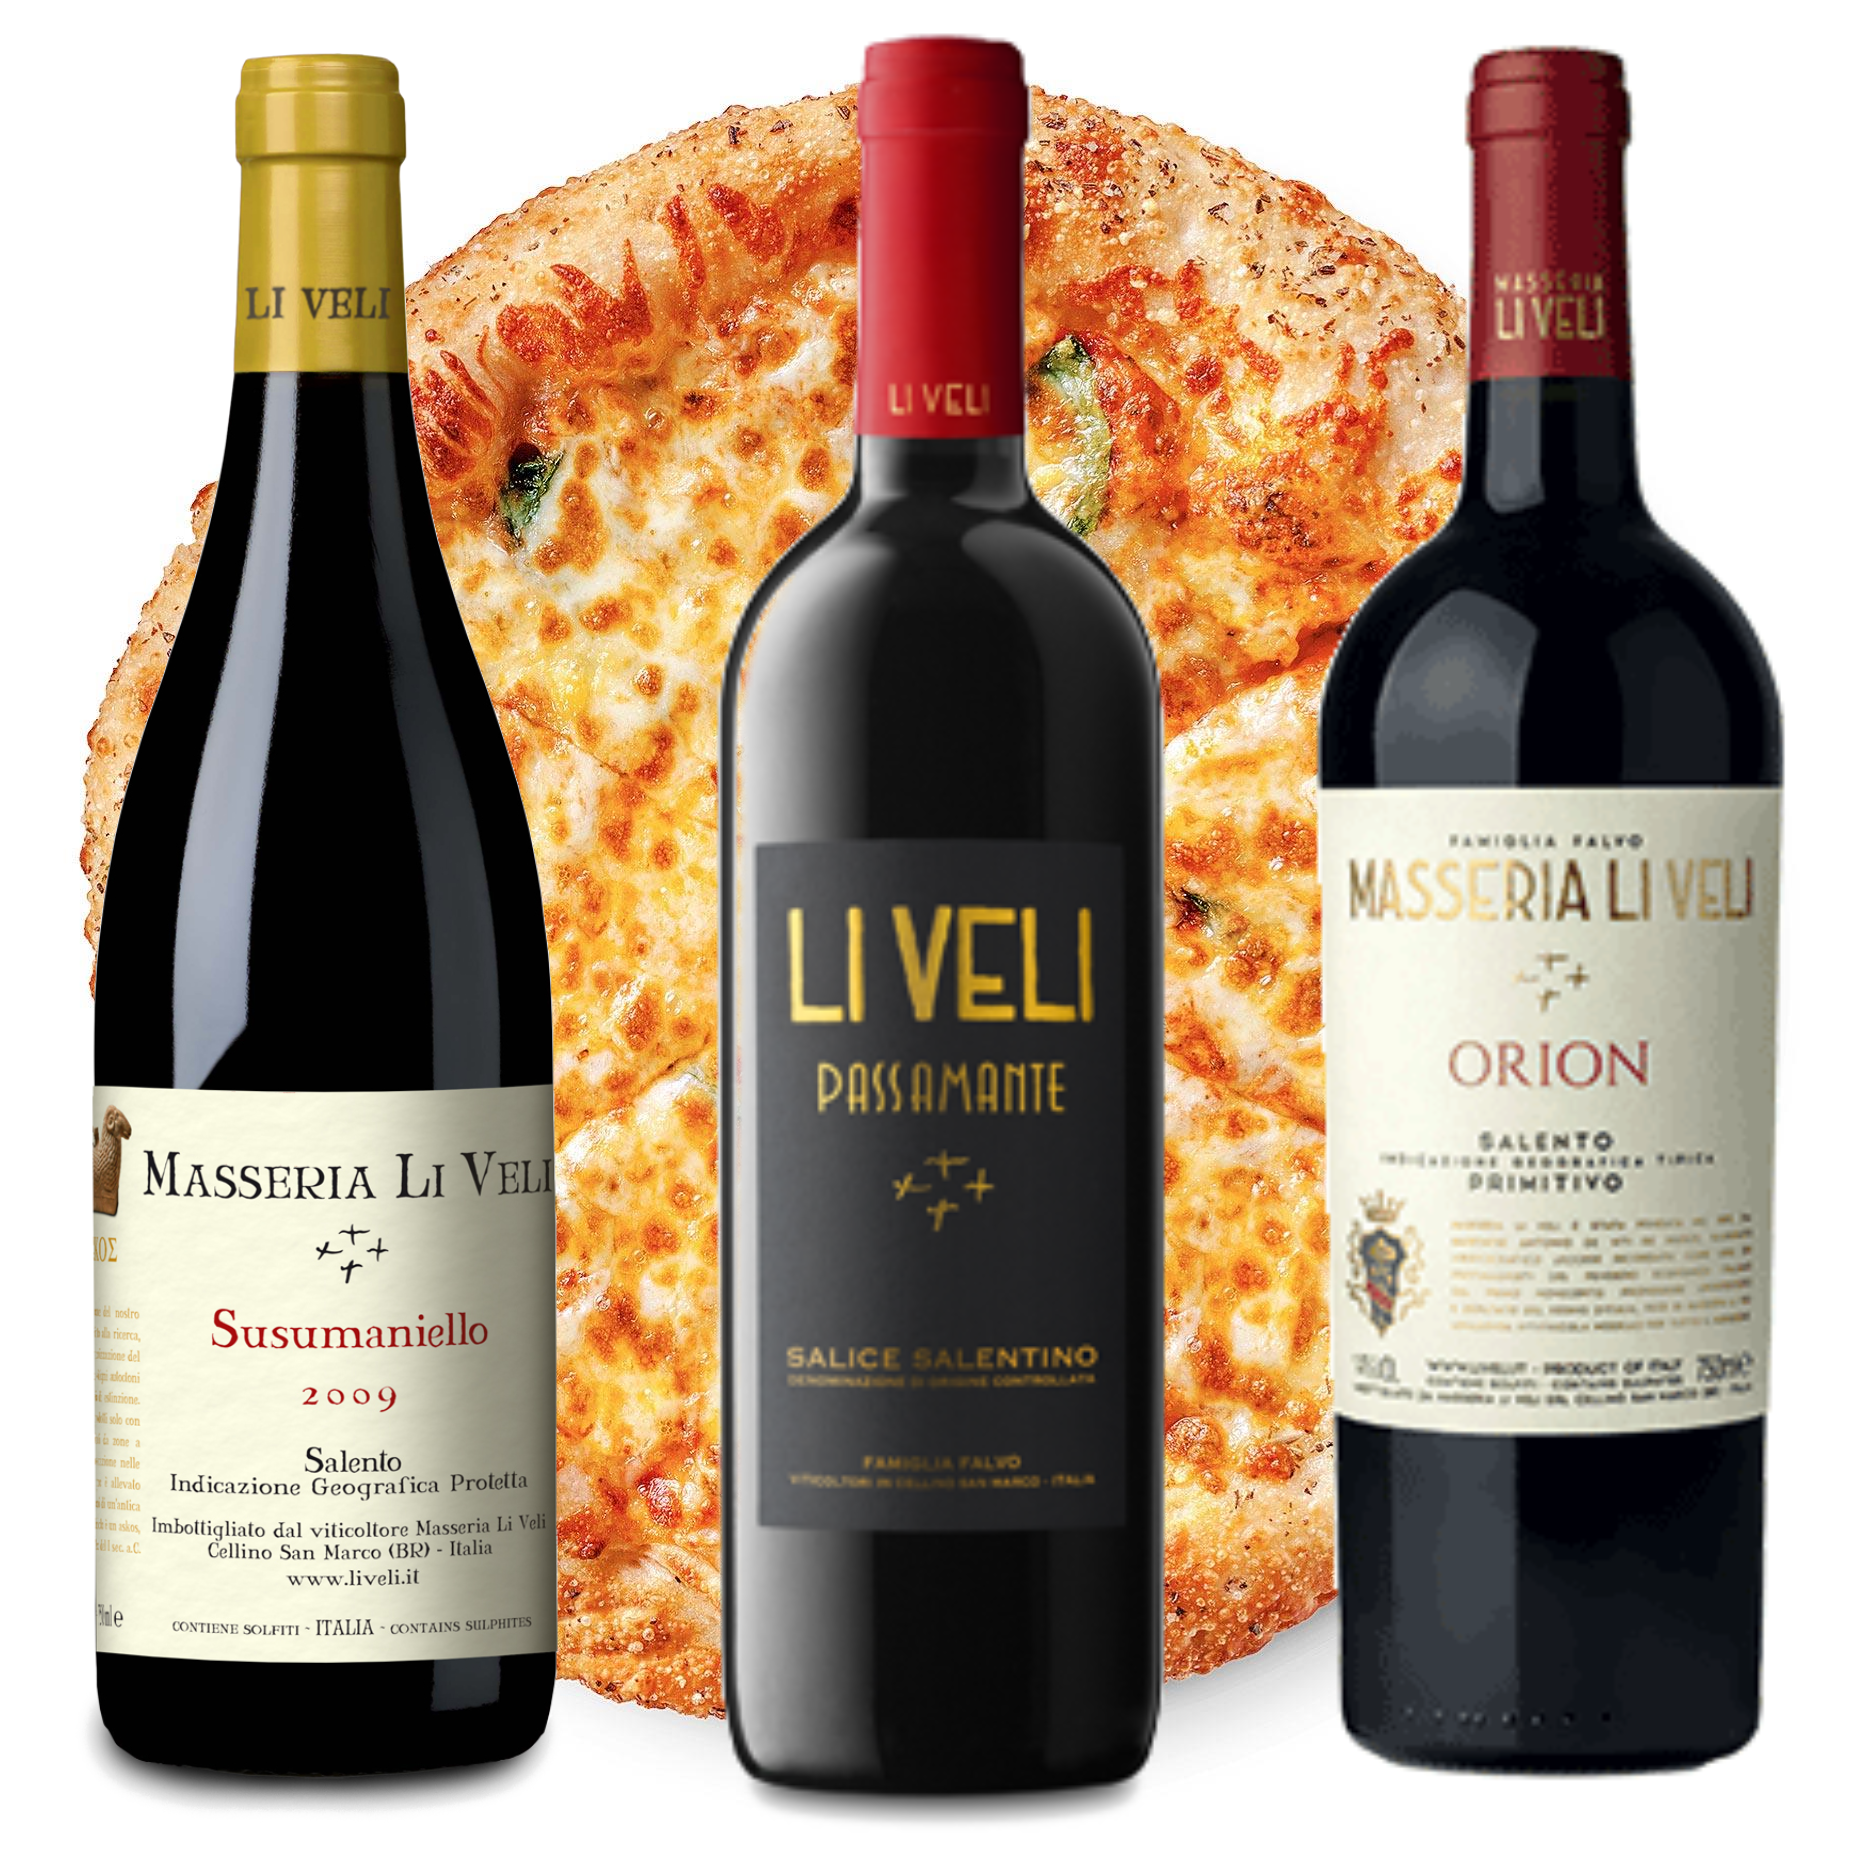 Going for pizza? Pick any of these 10 great wines.